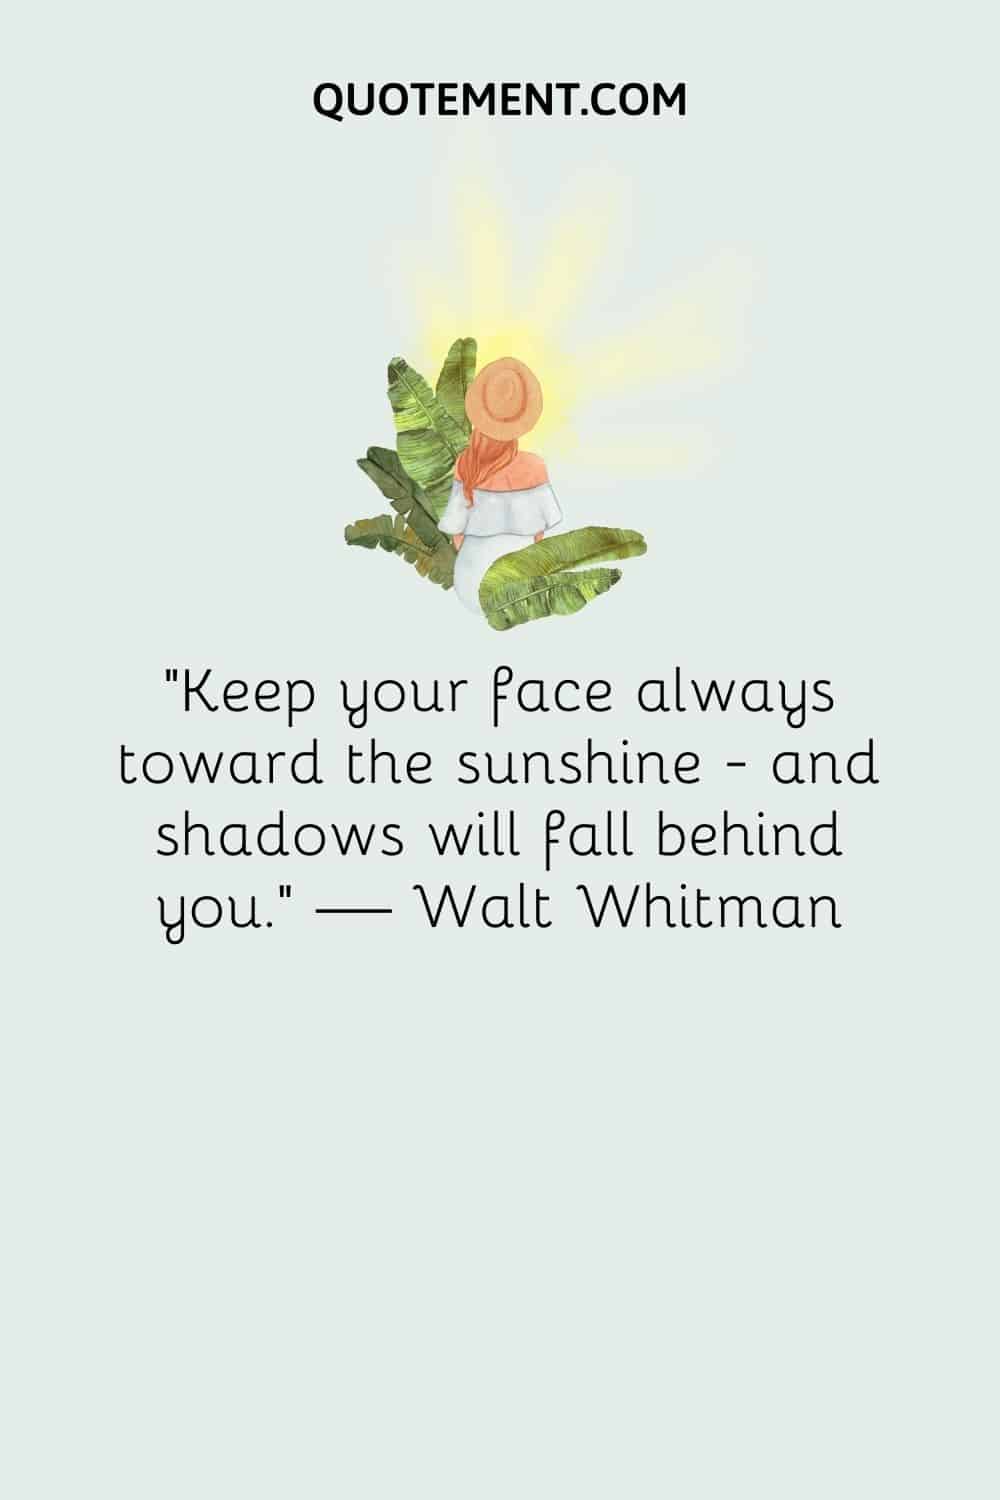 “Keep your face always toward the sunshine — and shadows will fall behind you.” — Walt Whitman